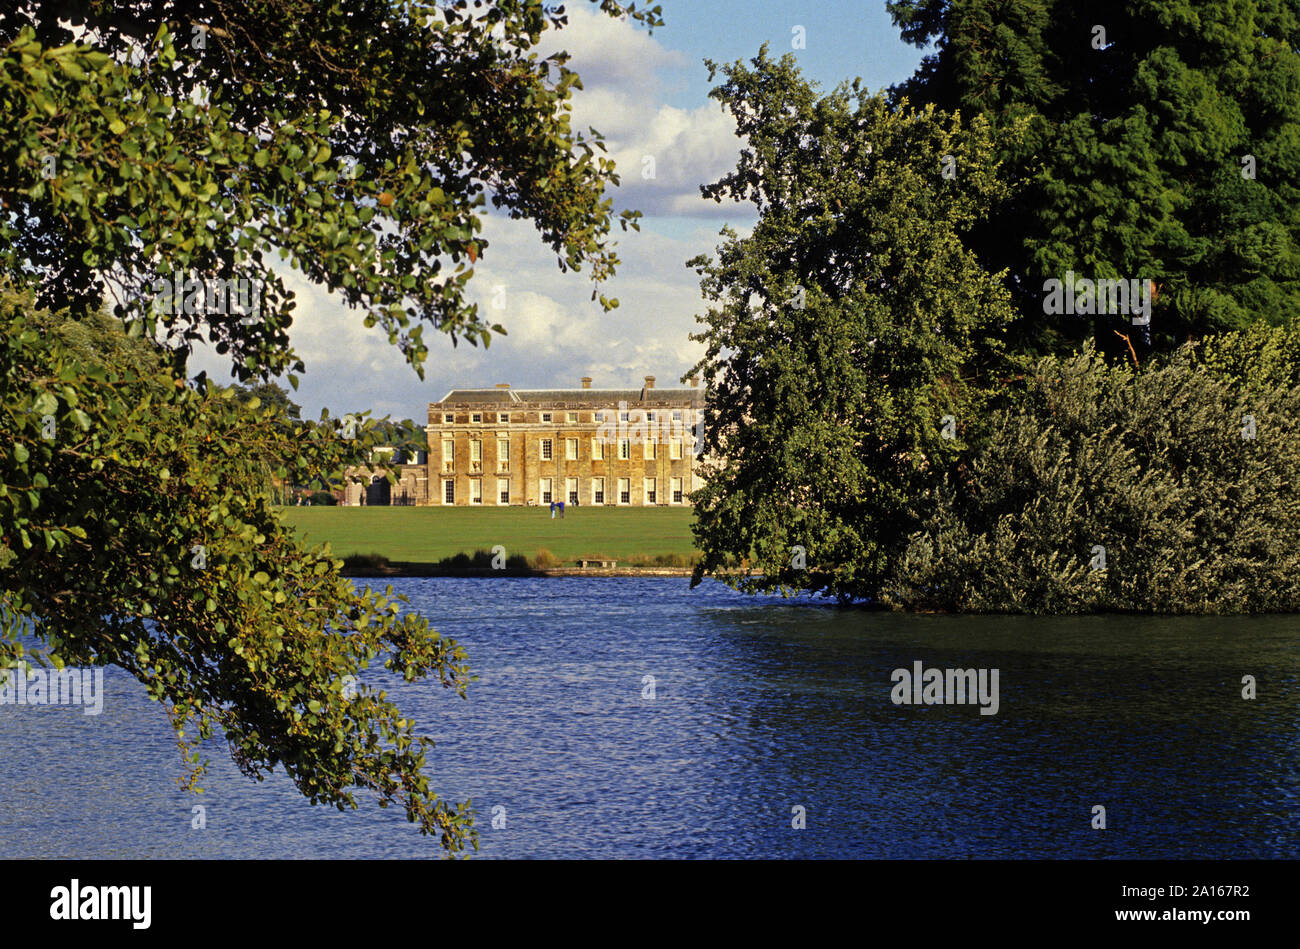 Petworth House stately home of Lord Egremont in West Sussex.THIS IMAGE WAS MADE FROM LAND TO WHICH THE PUBLIC HAS FREE ACCESS Stock Photo